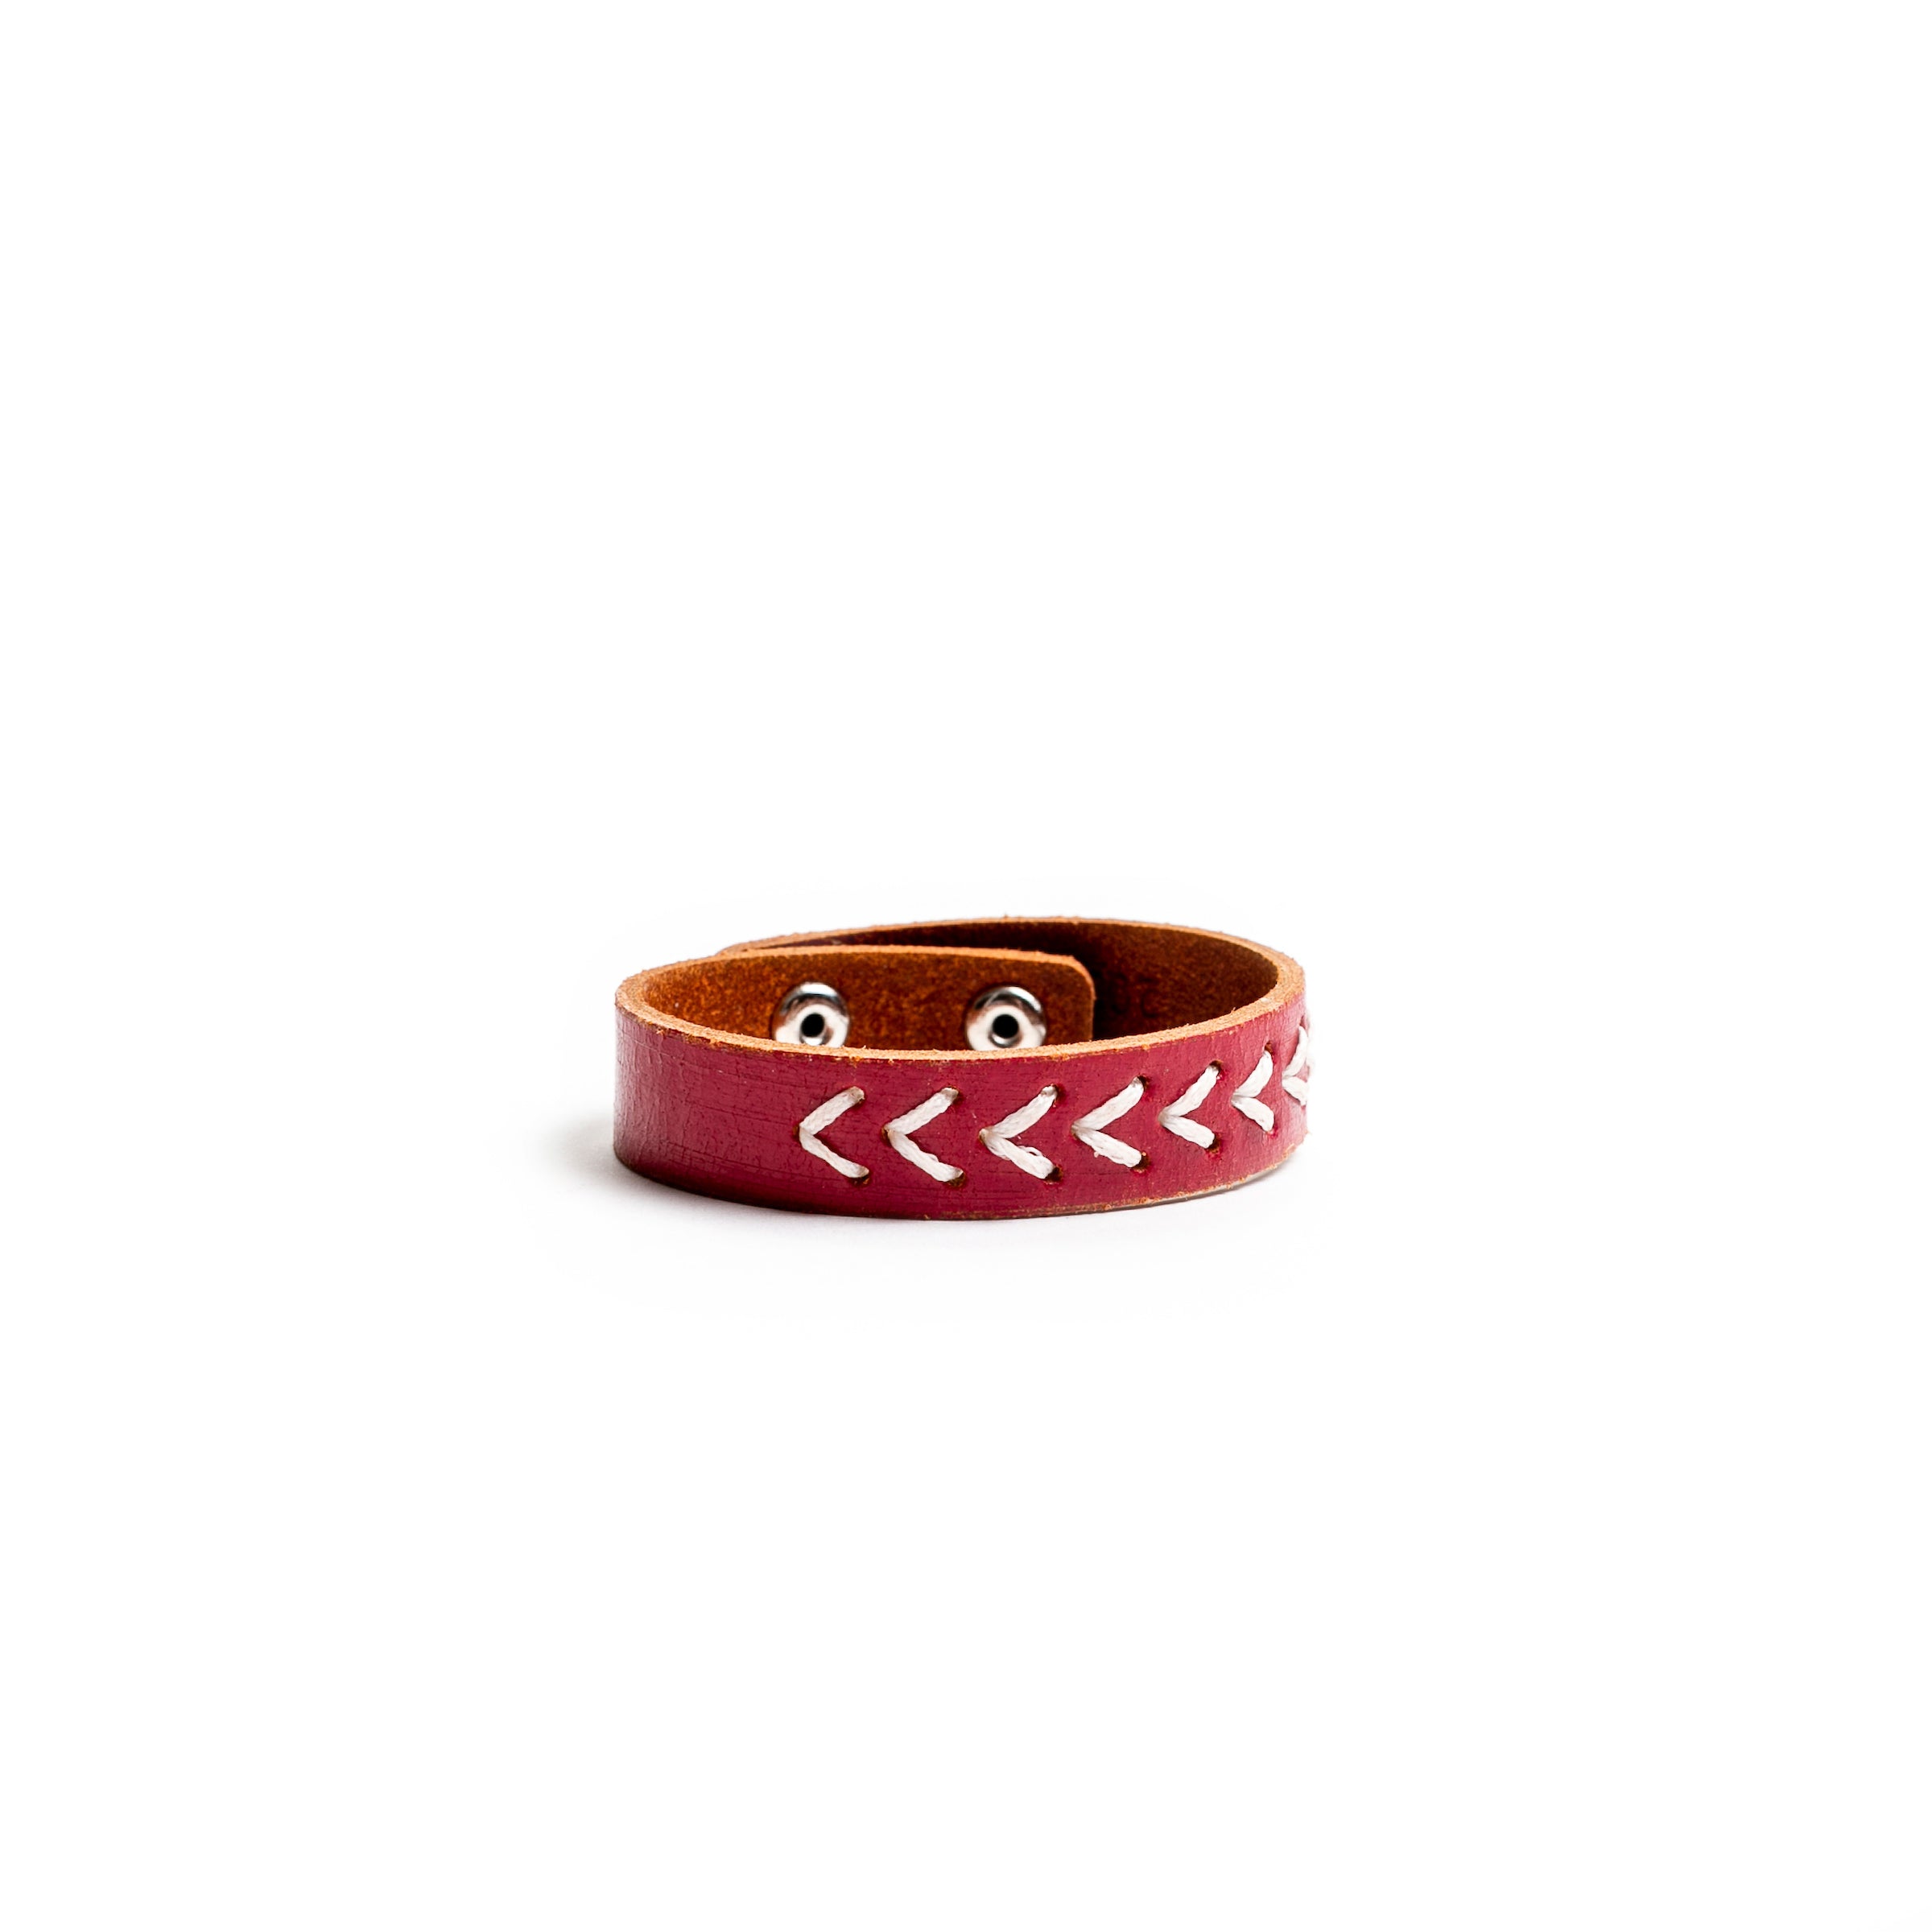 Red Leather Bracelet with Arrow Stitching